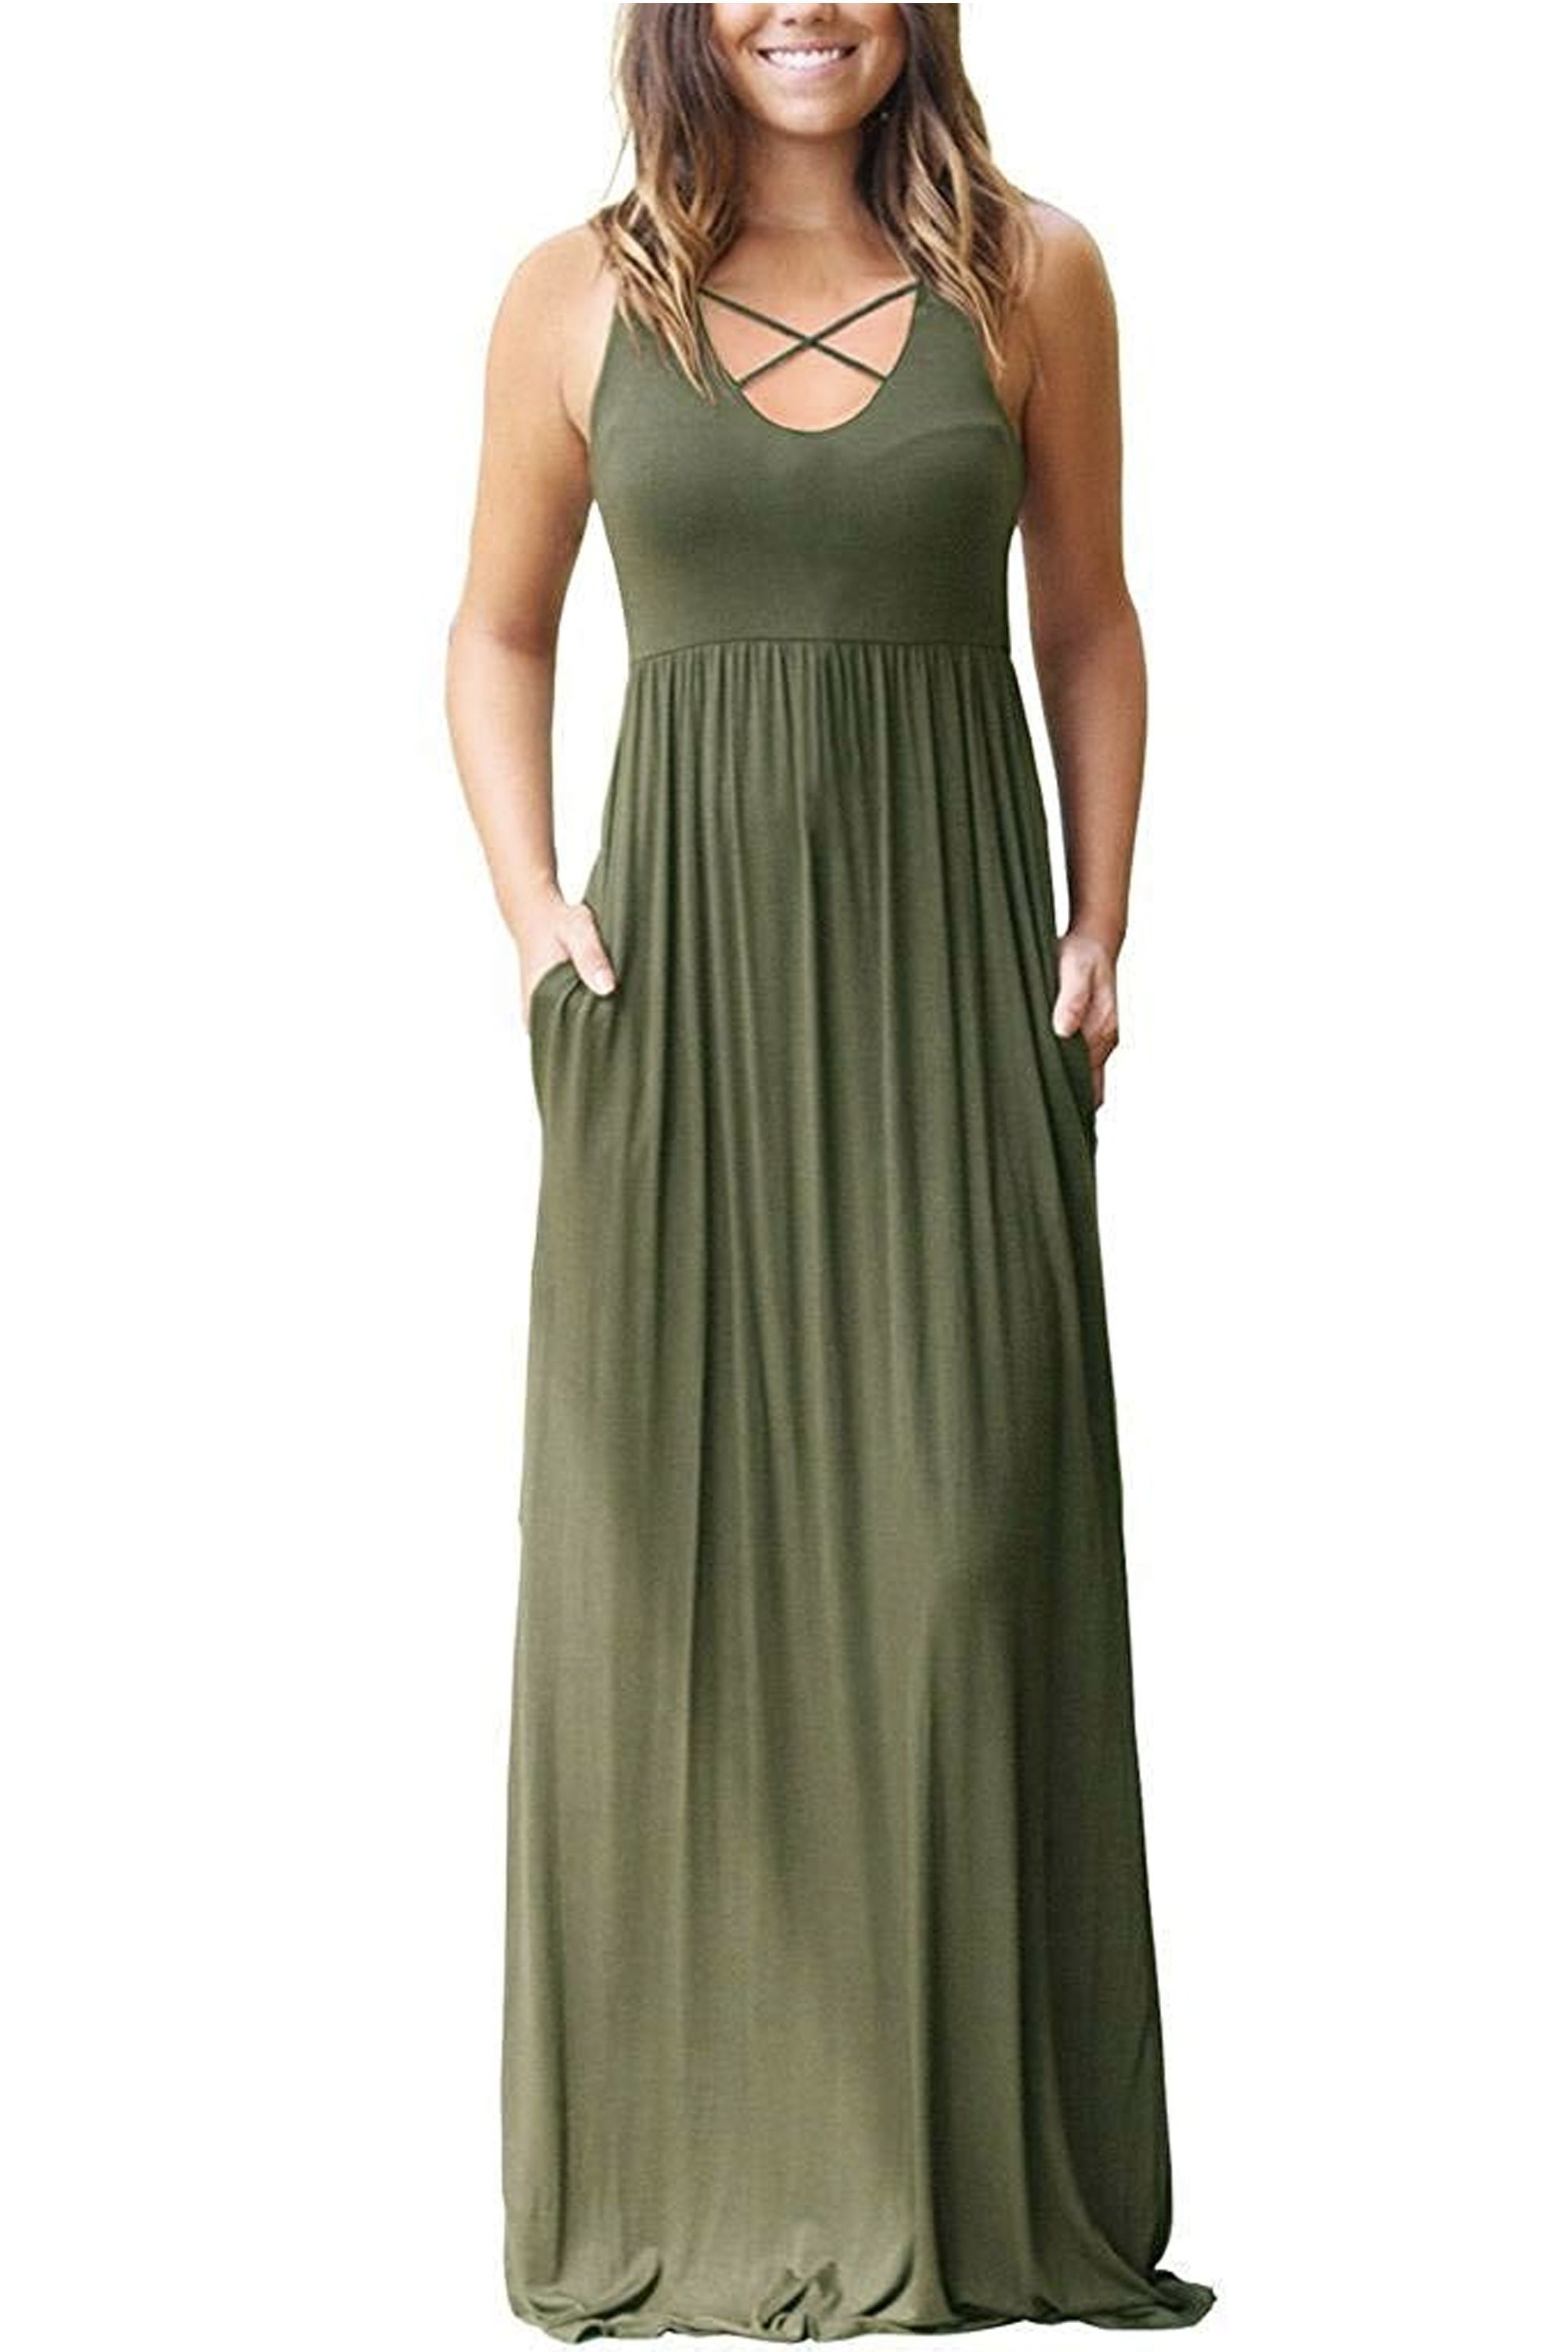 You Need to Add This $39 Maxi Dress to Your Summer Wardrobe - Amazon Maxi  Dresses